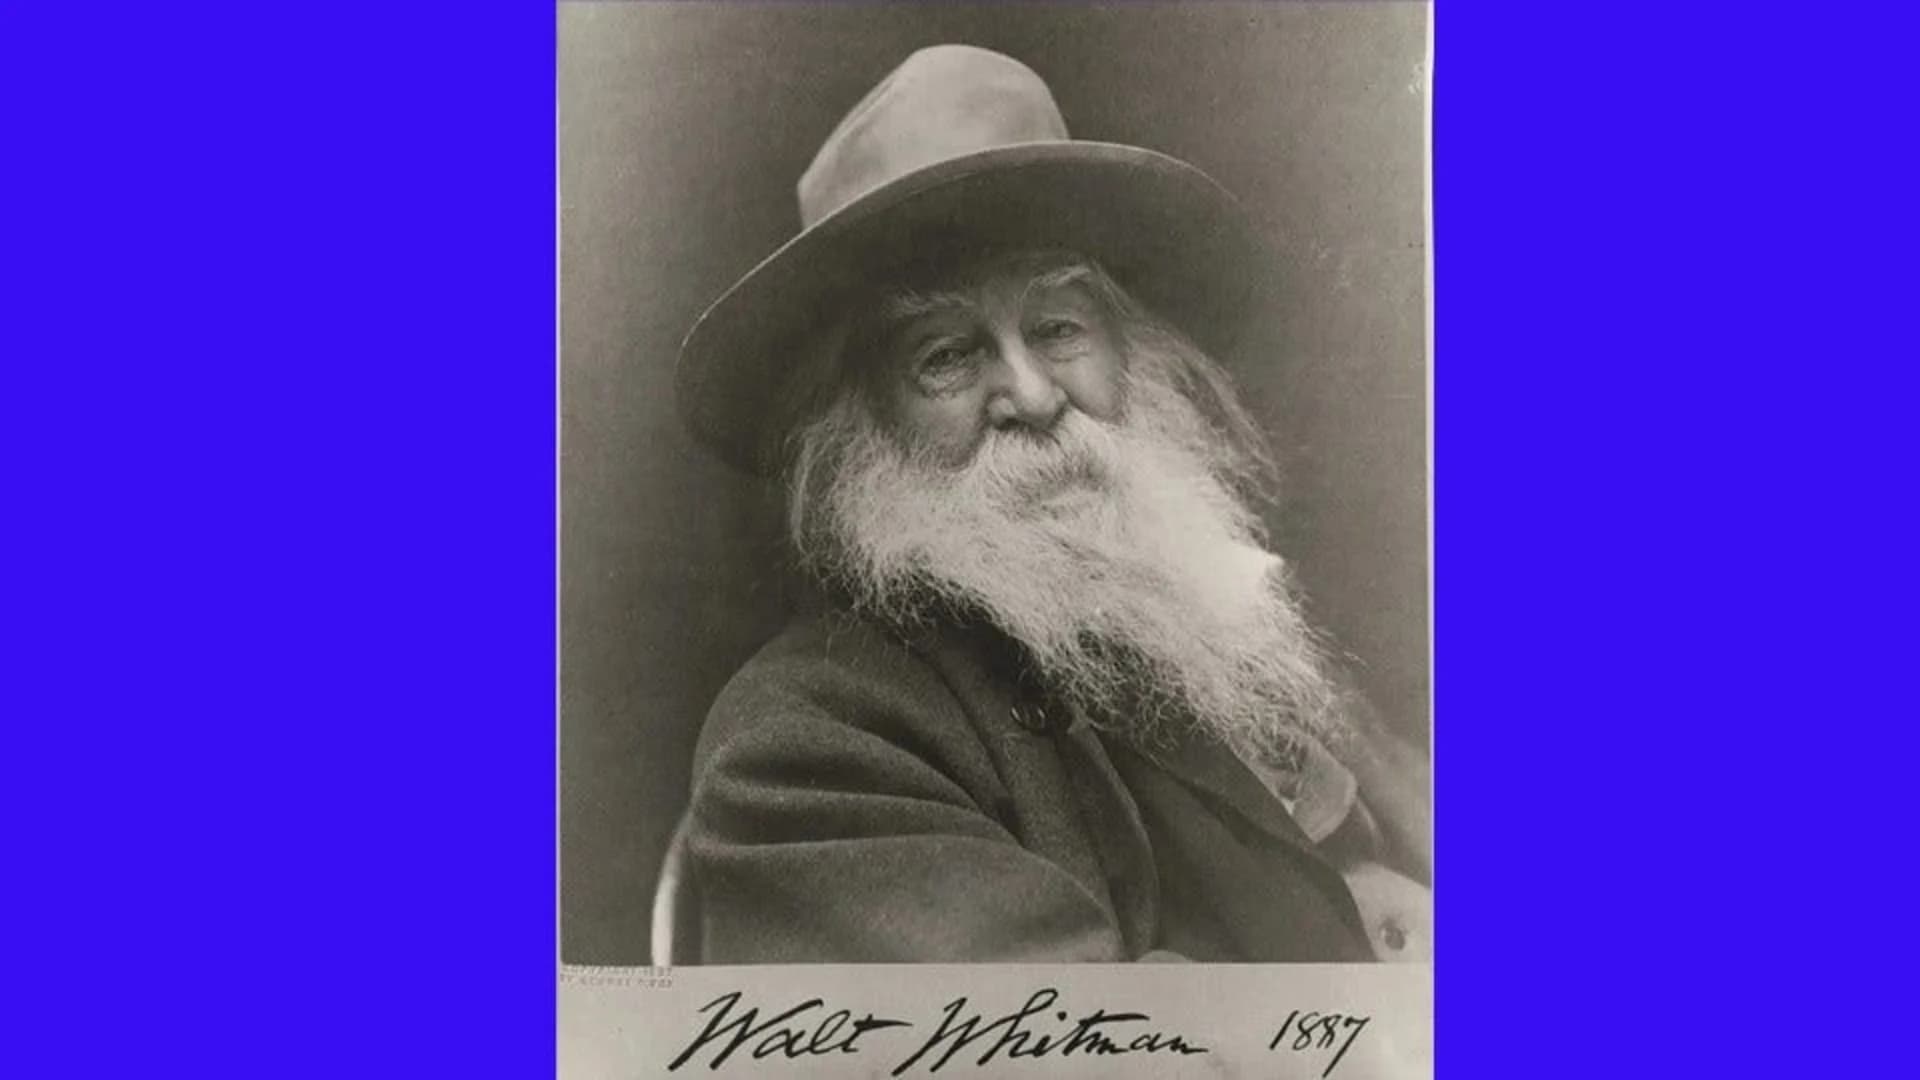 Bicentennial celebration of the life and legacy of Walt Whitman